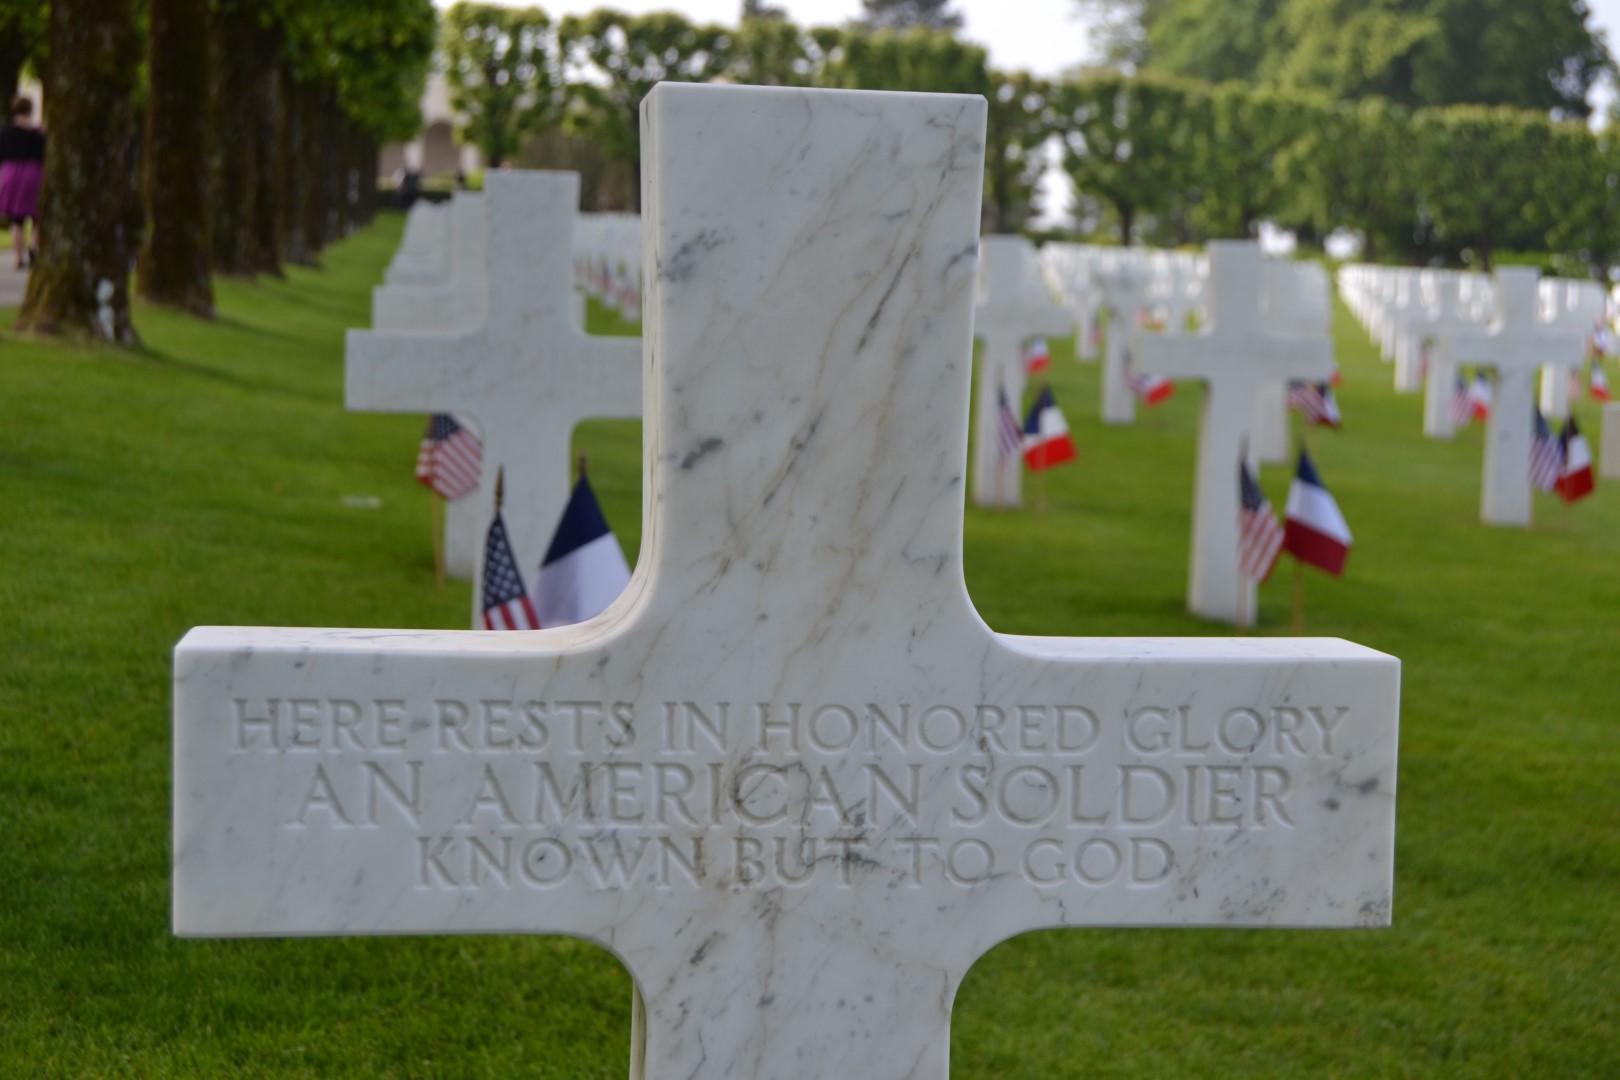 Memorial Day at Meuse-Argonne American Cemetery and Memorial in France